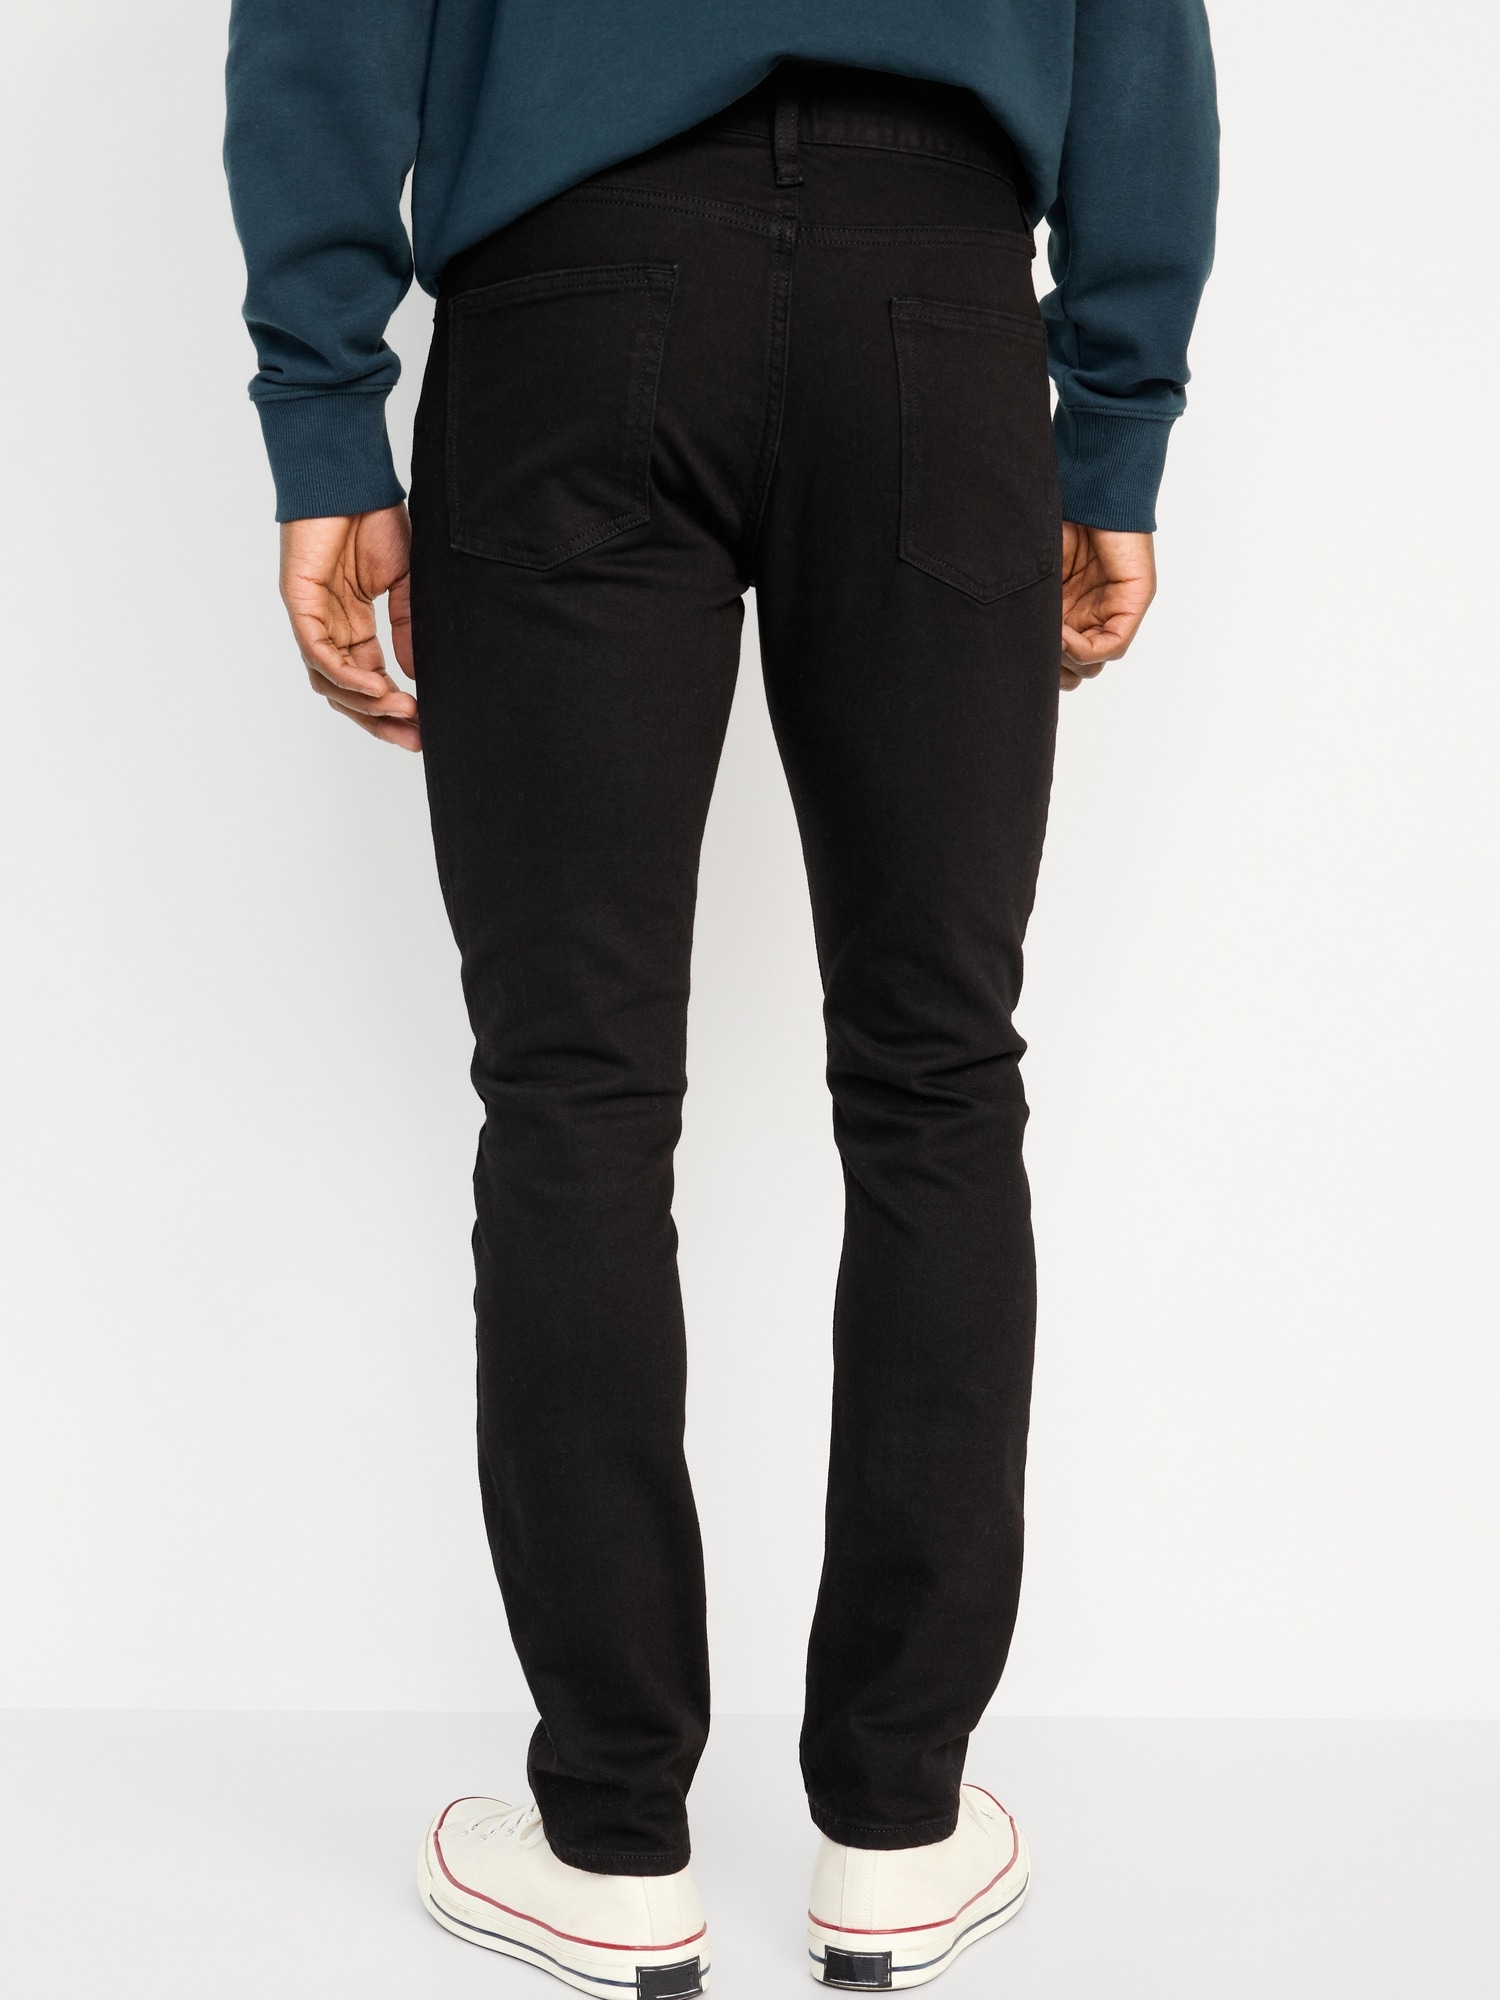 Page 2  Pantalon chino homme : coupes regular et slim - Page 2